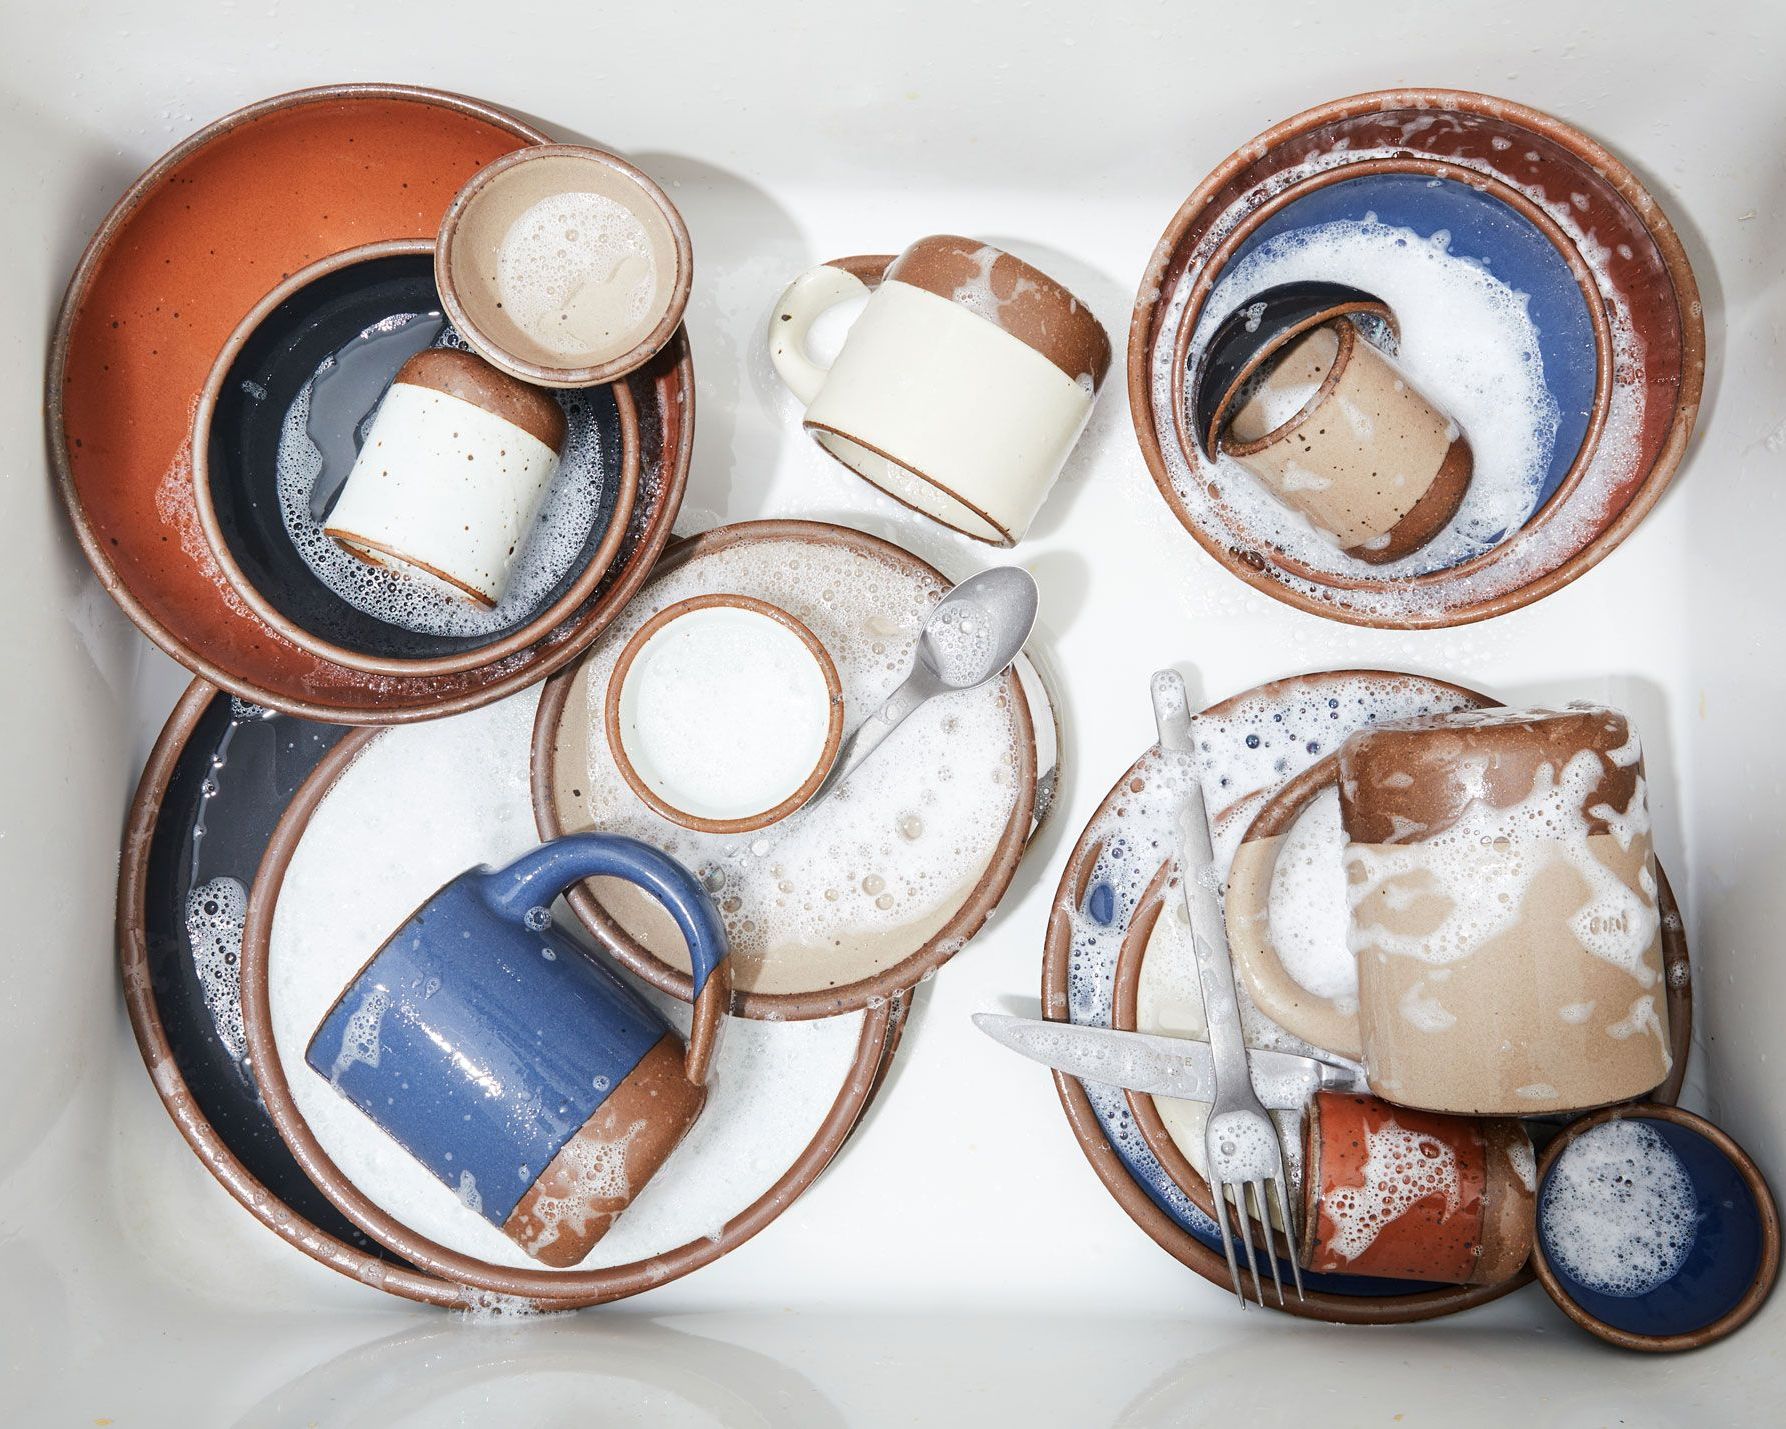 A stack of plates and mugs in core colors (blue, white, black, brown) in a sink covered in soap